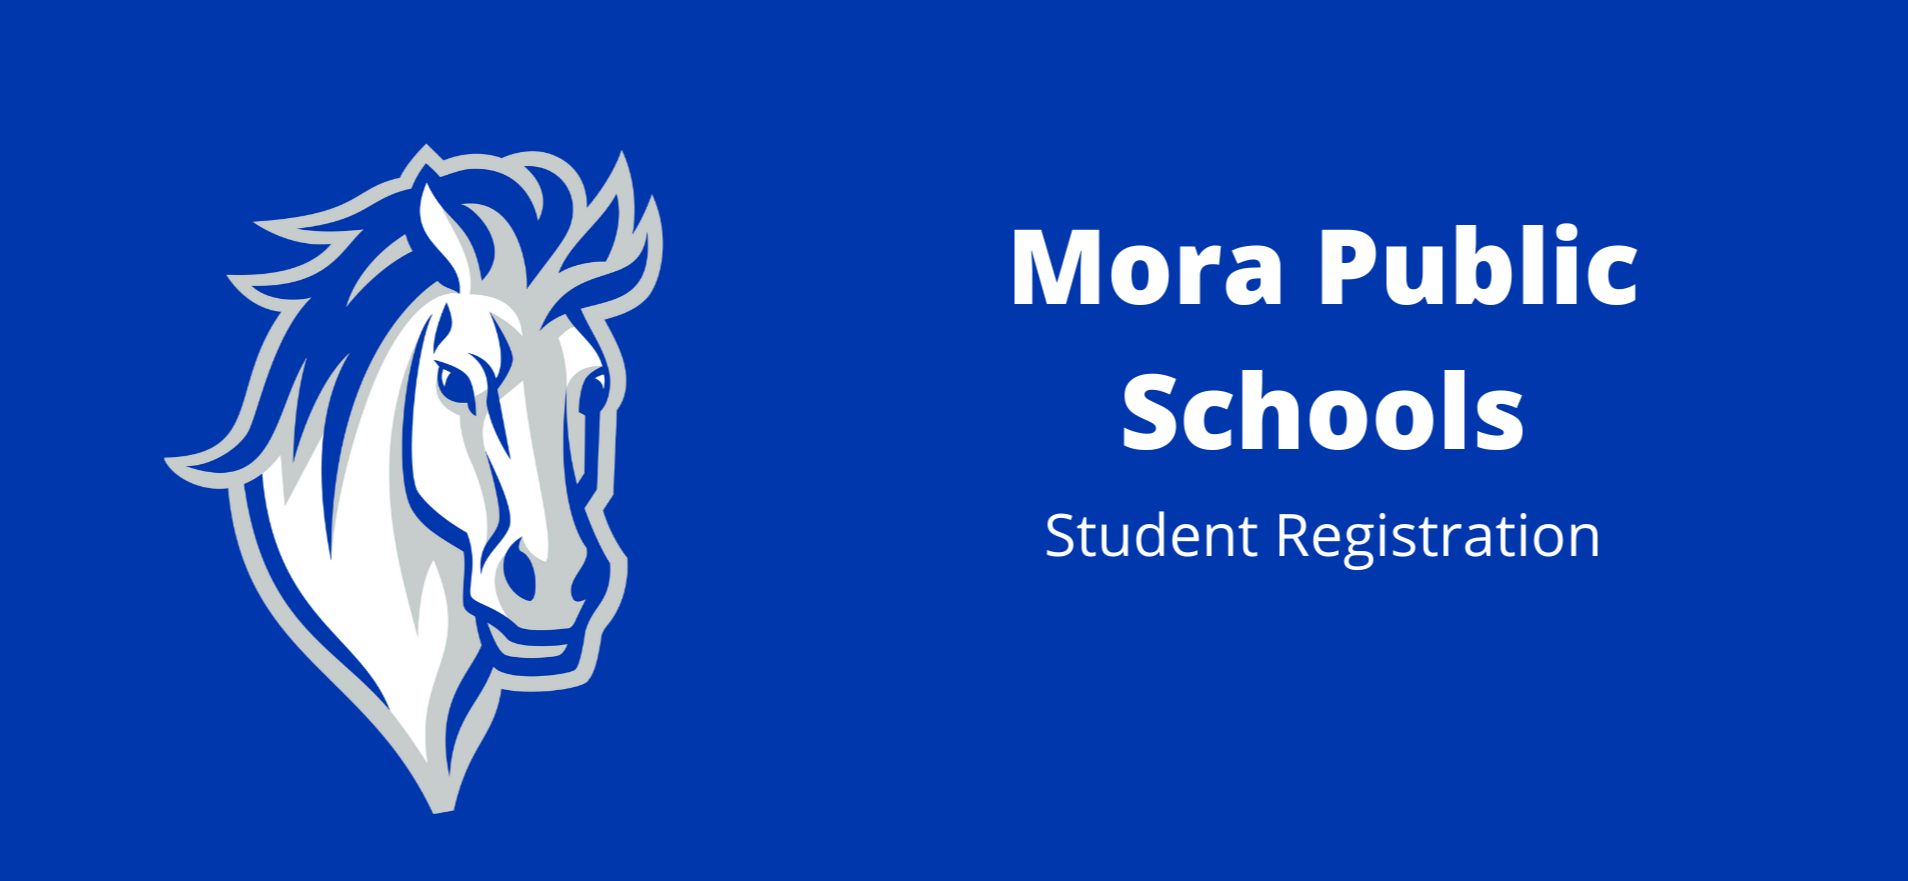 Mora mustang logo on blue background with text reading "Mora Public Schools Student Registration